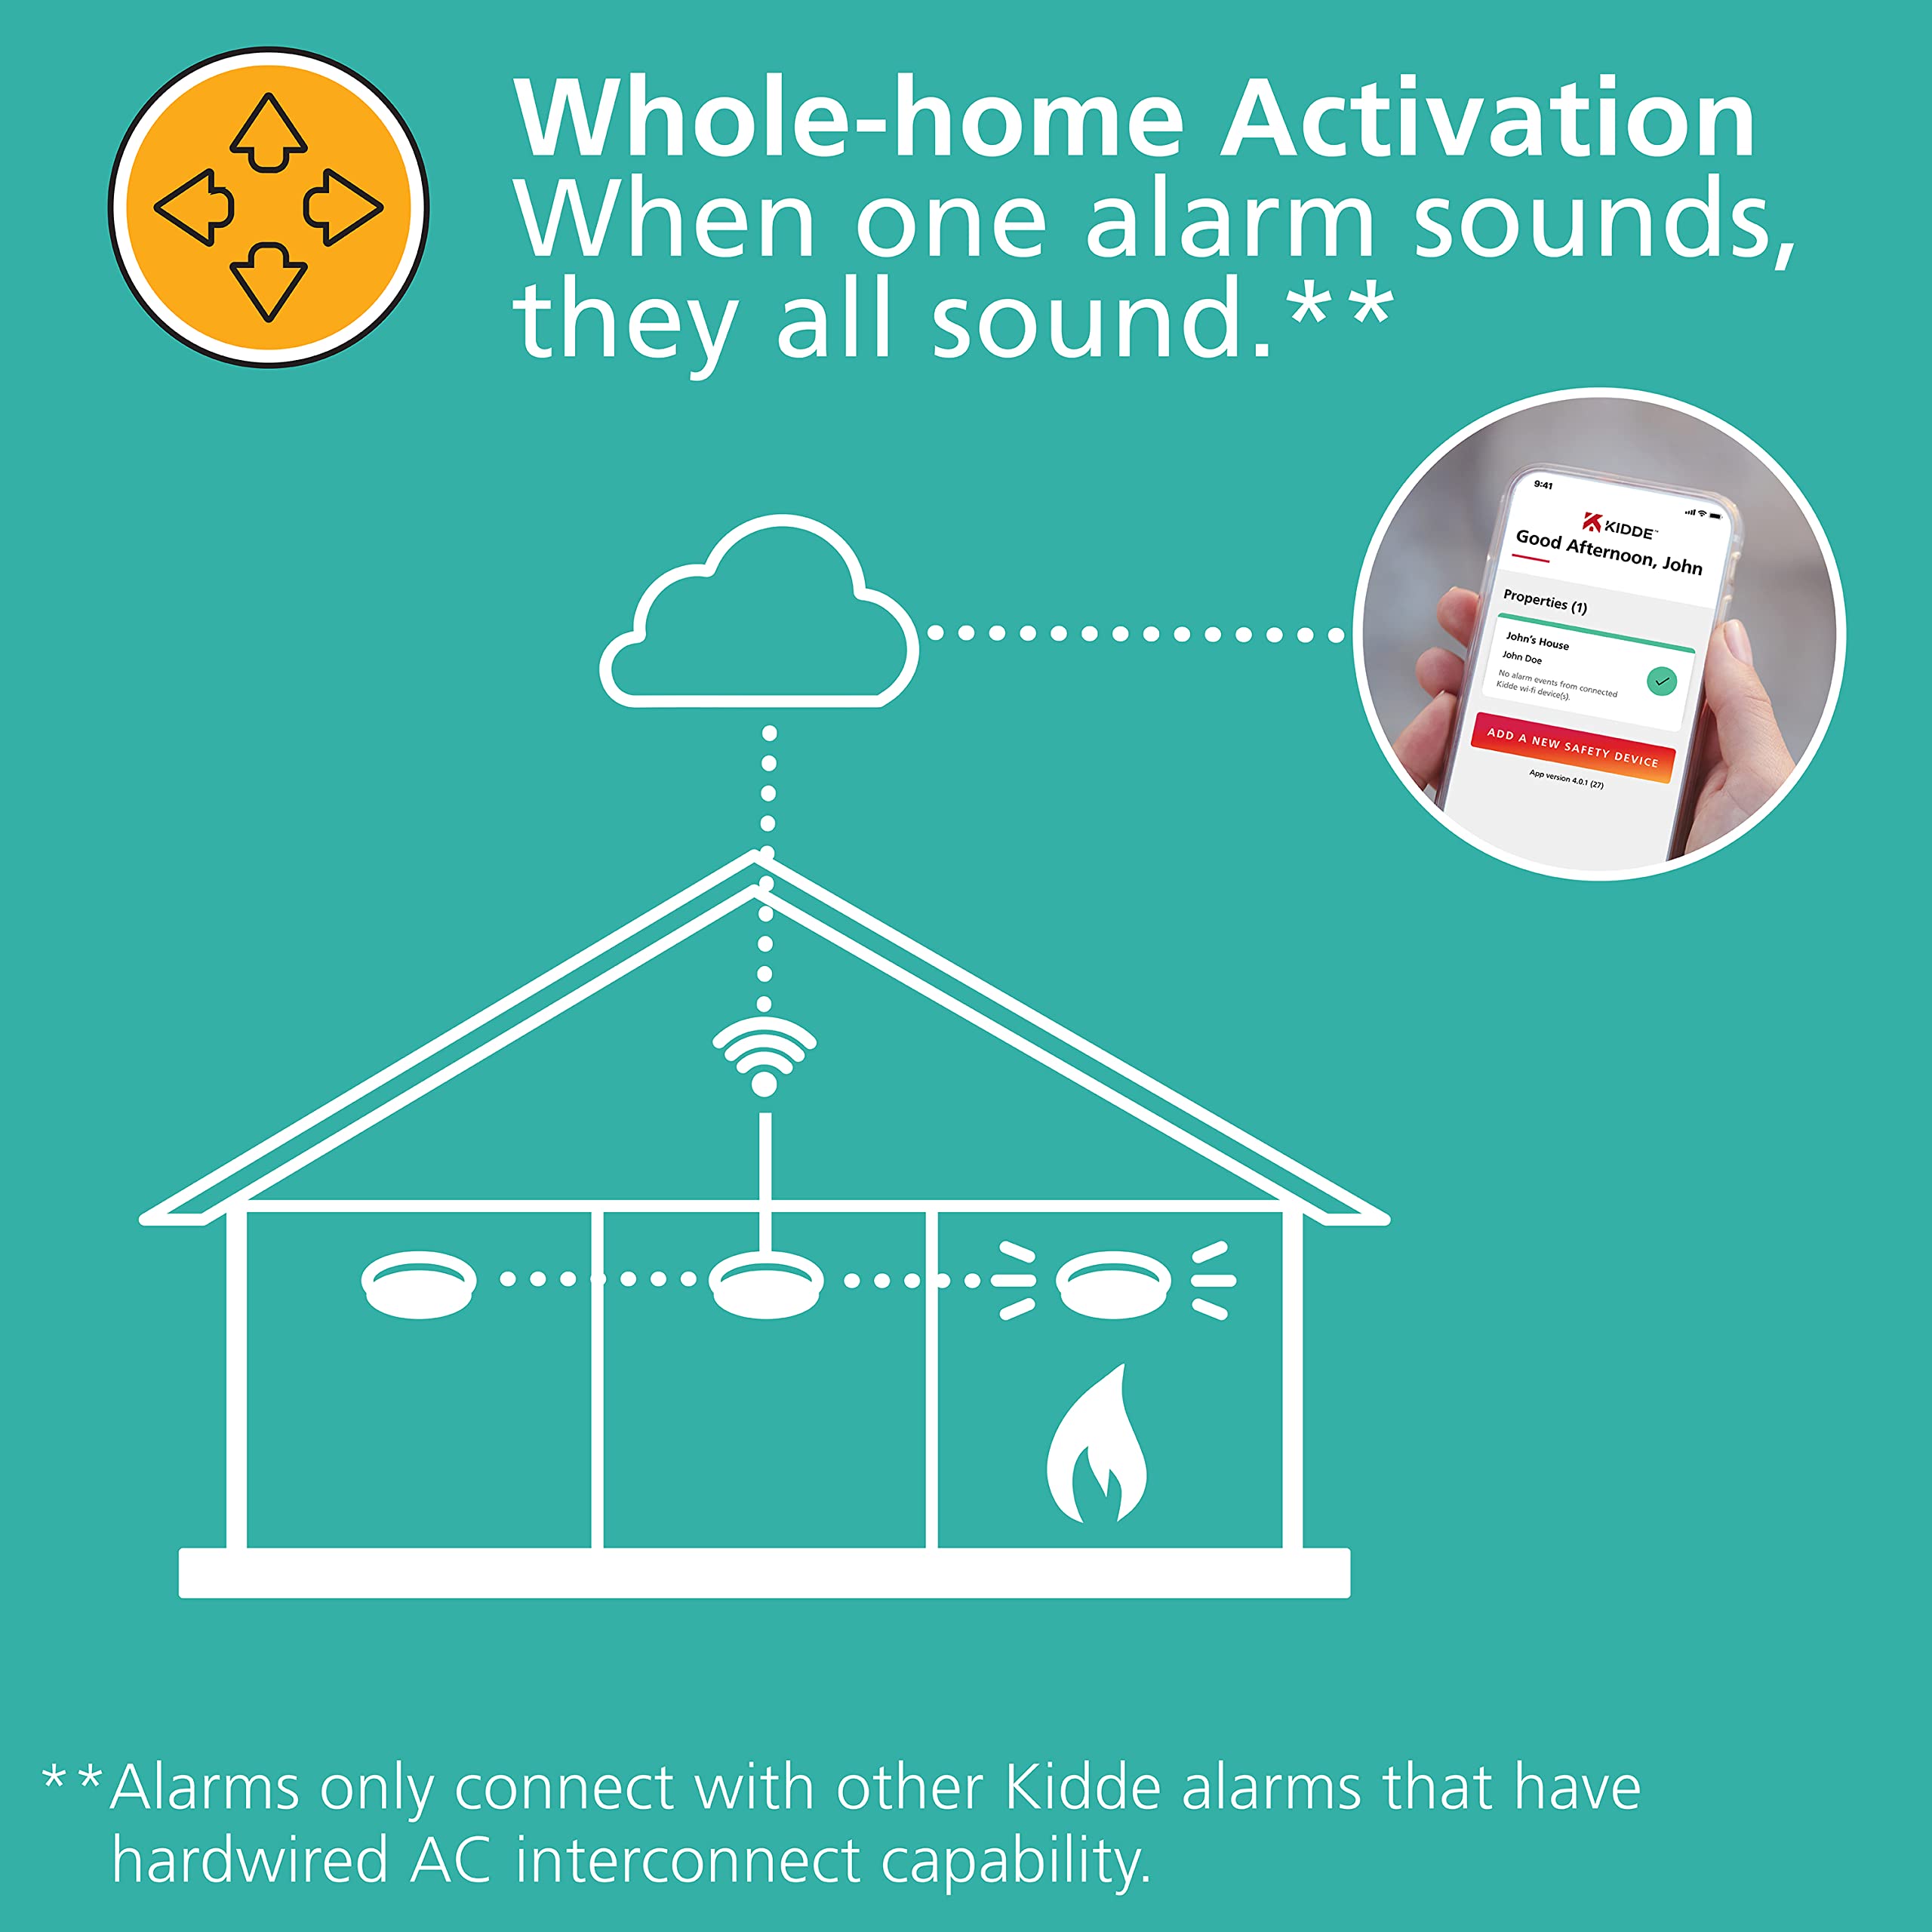 Kidde Smart Smoke Detector & Indoor Air Quality Monitor, WiFi, Alexa Compatible Device, Hardwired w/Battery Backup, Voice & App Alerts